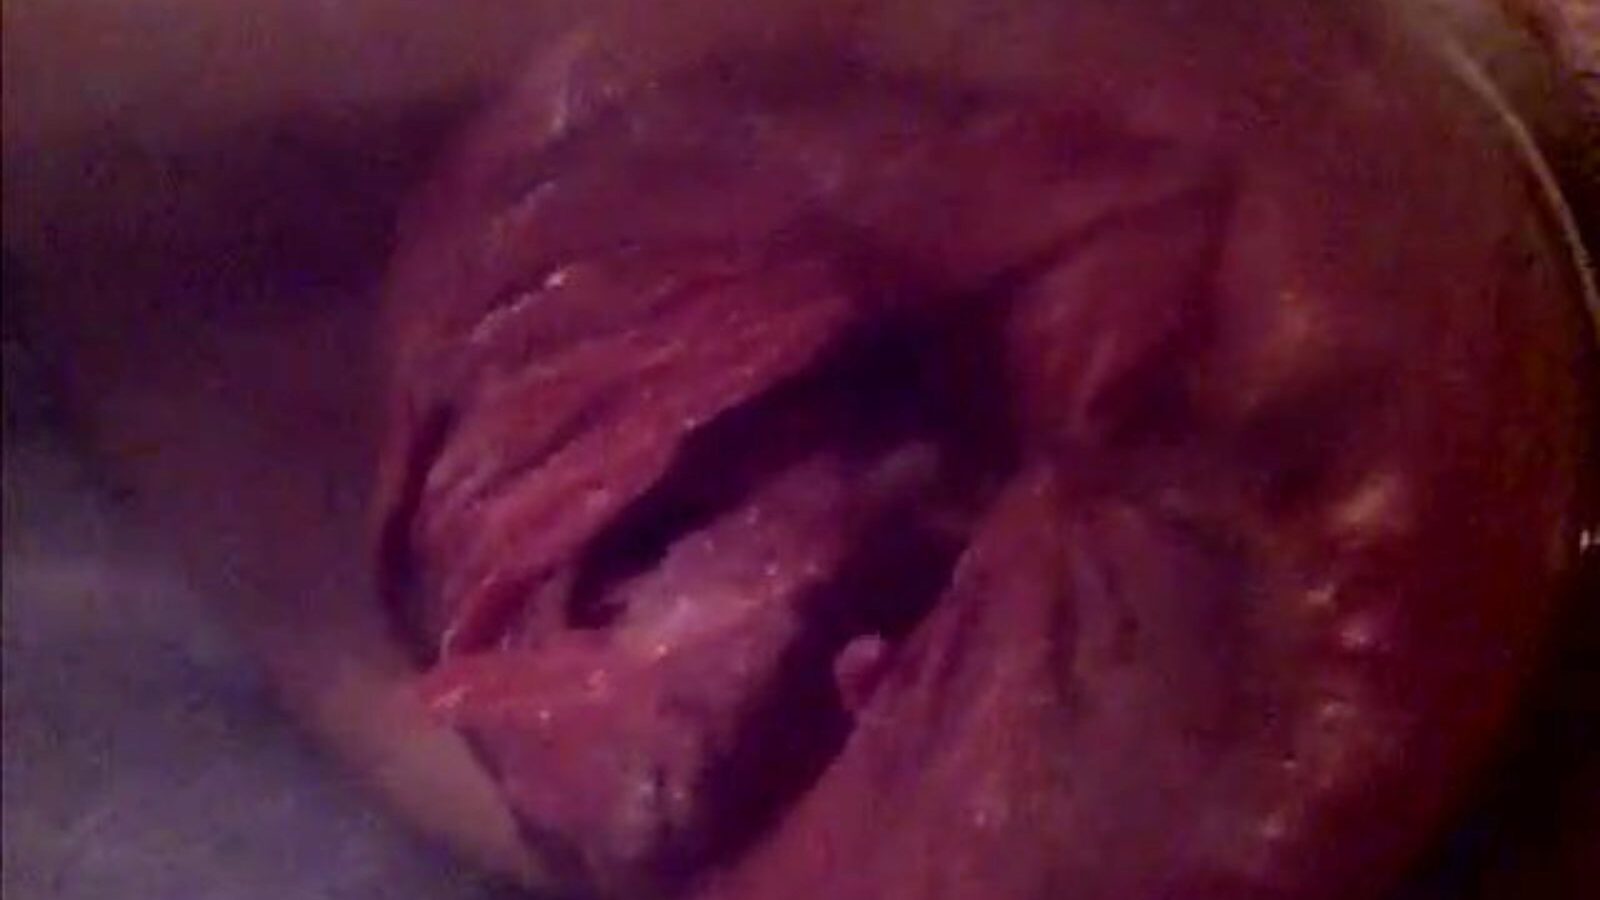 Big Pussy Pumped Enormously to a Gape Pumped my wet crack to a total throated gape Biggest pump ever made me jism so firm and lengthy then fisted